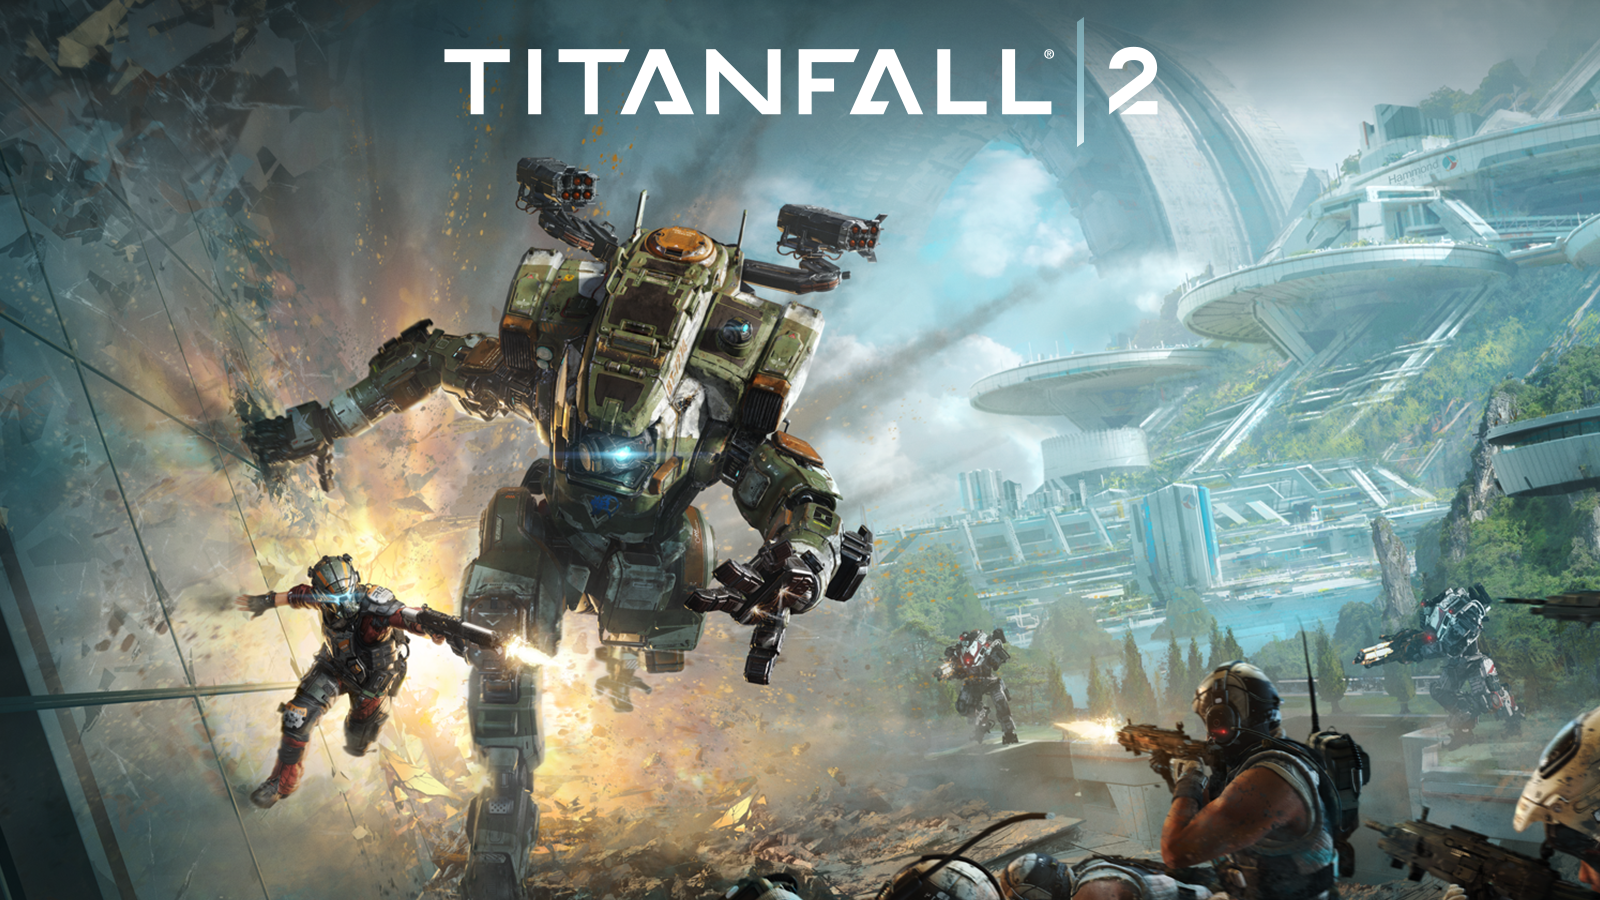 Hot Deal: Titanfall 2 for $28